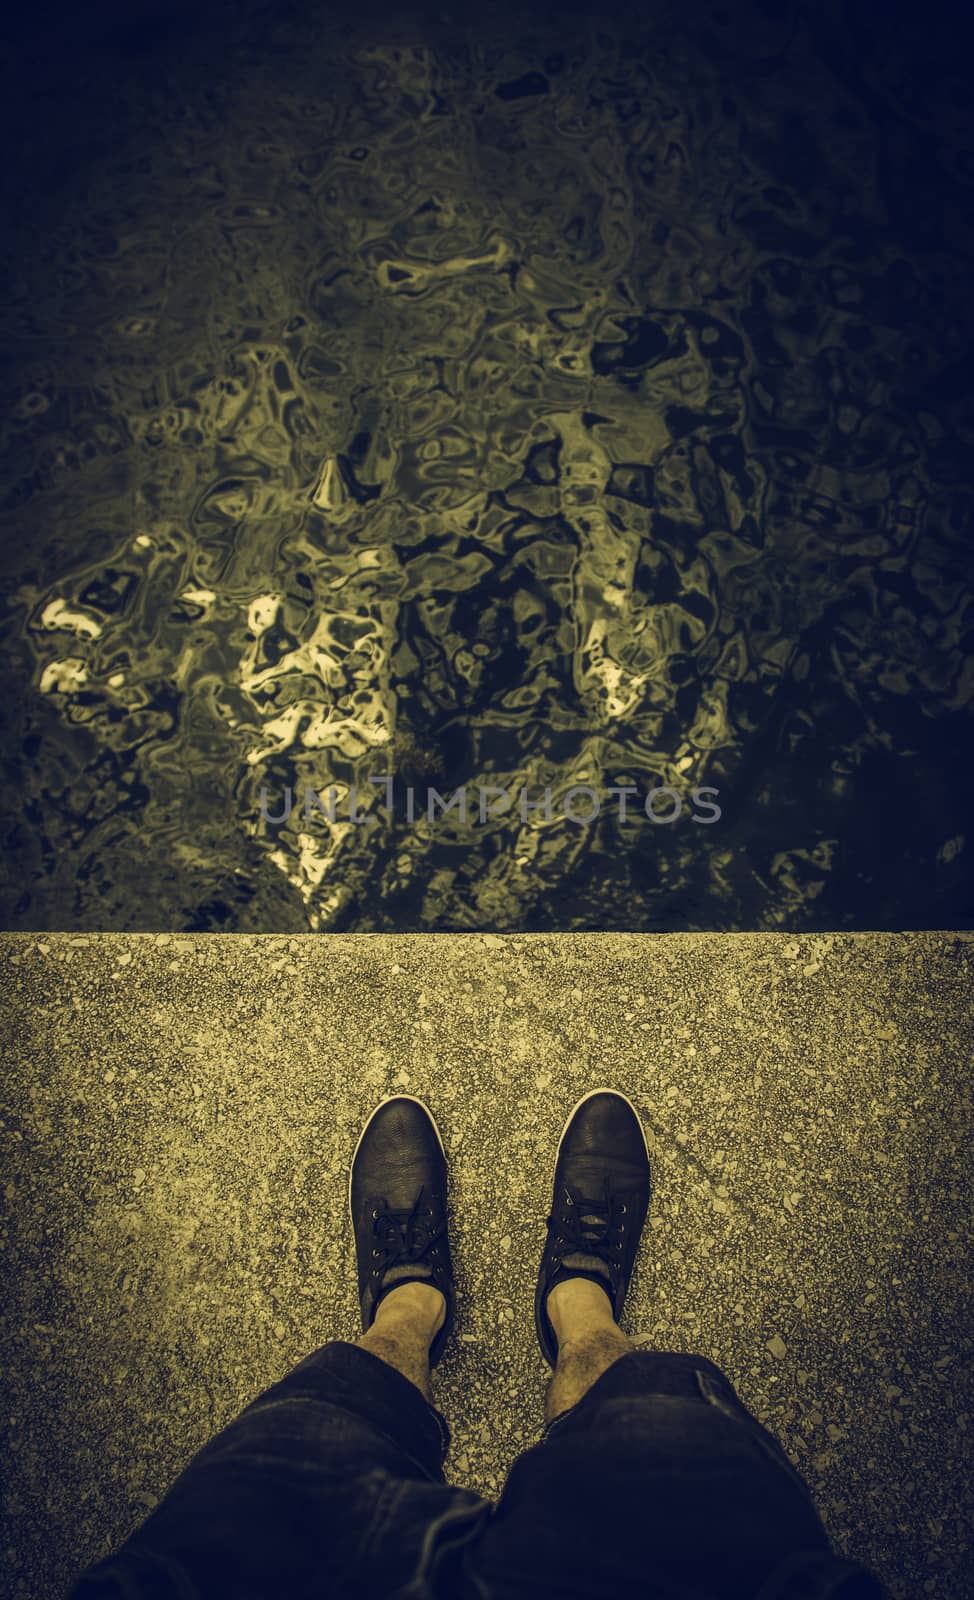 Feet on the water's edge, detail of exploration and contemplation